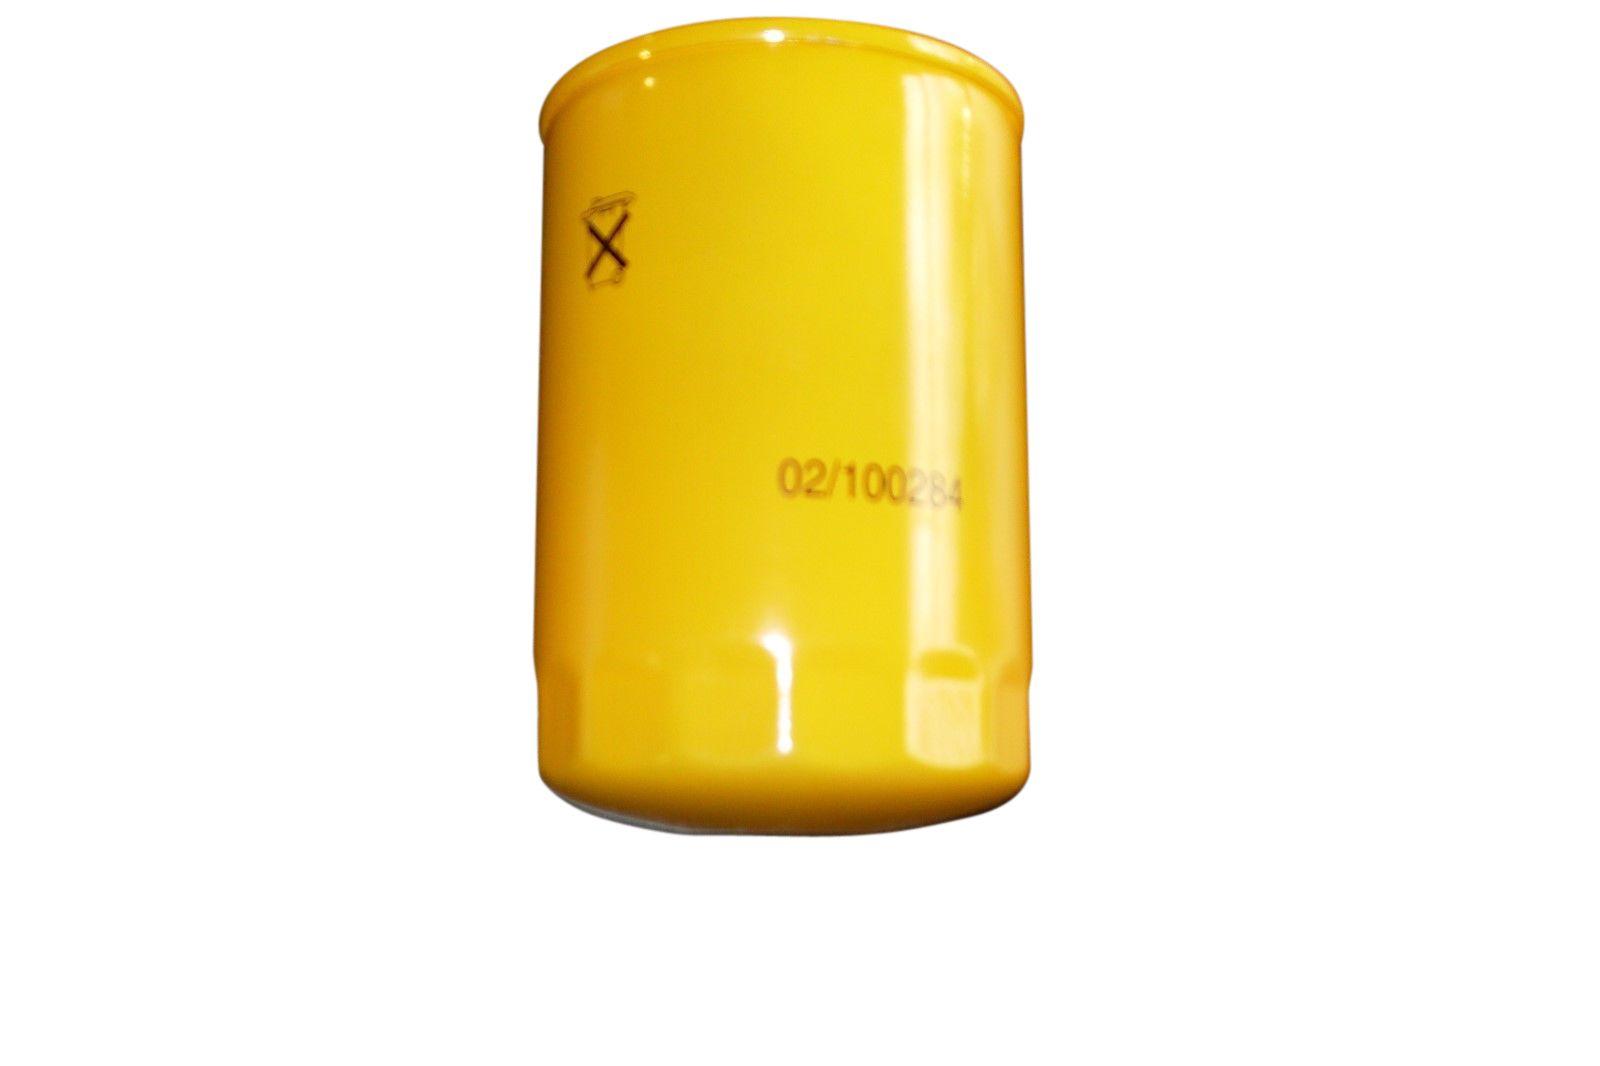 JCB PARTS OIL FILTERÂ FOR VARIOUS PERKINS ENGINES 02/100284A